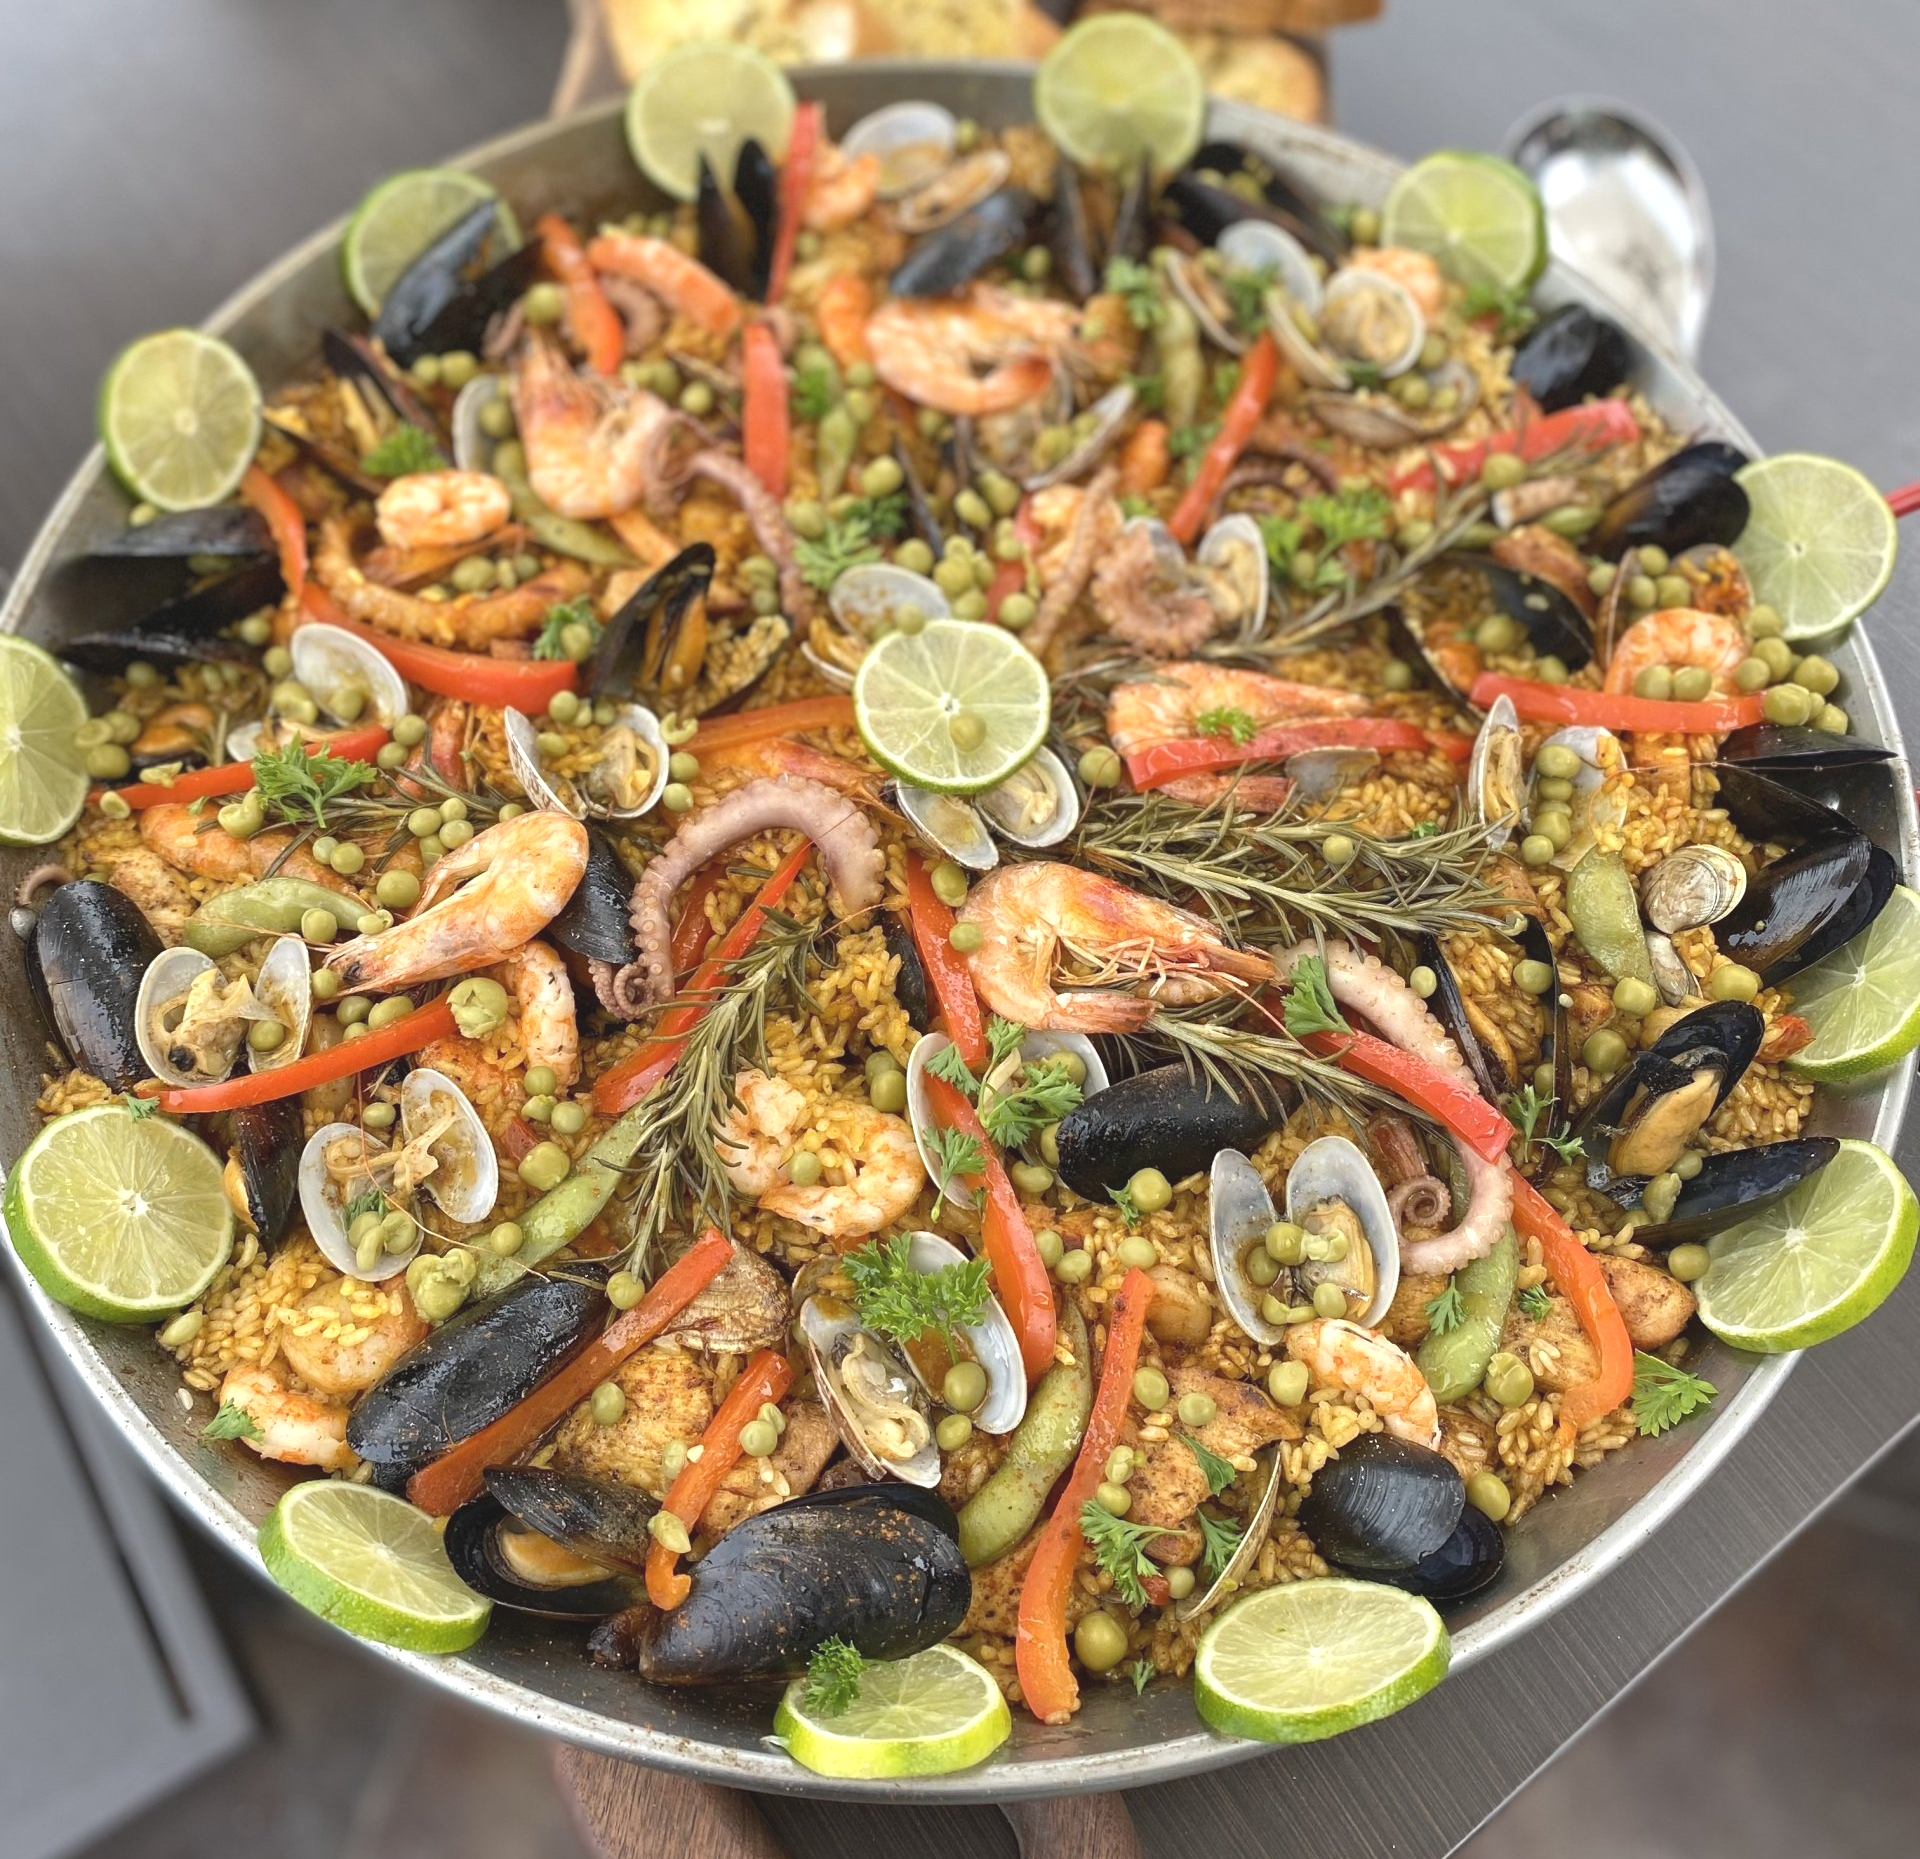 Enjoy Paella & Appetizers For Your Next Catered Event in Columbia, MO